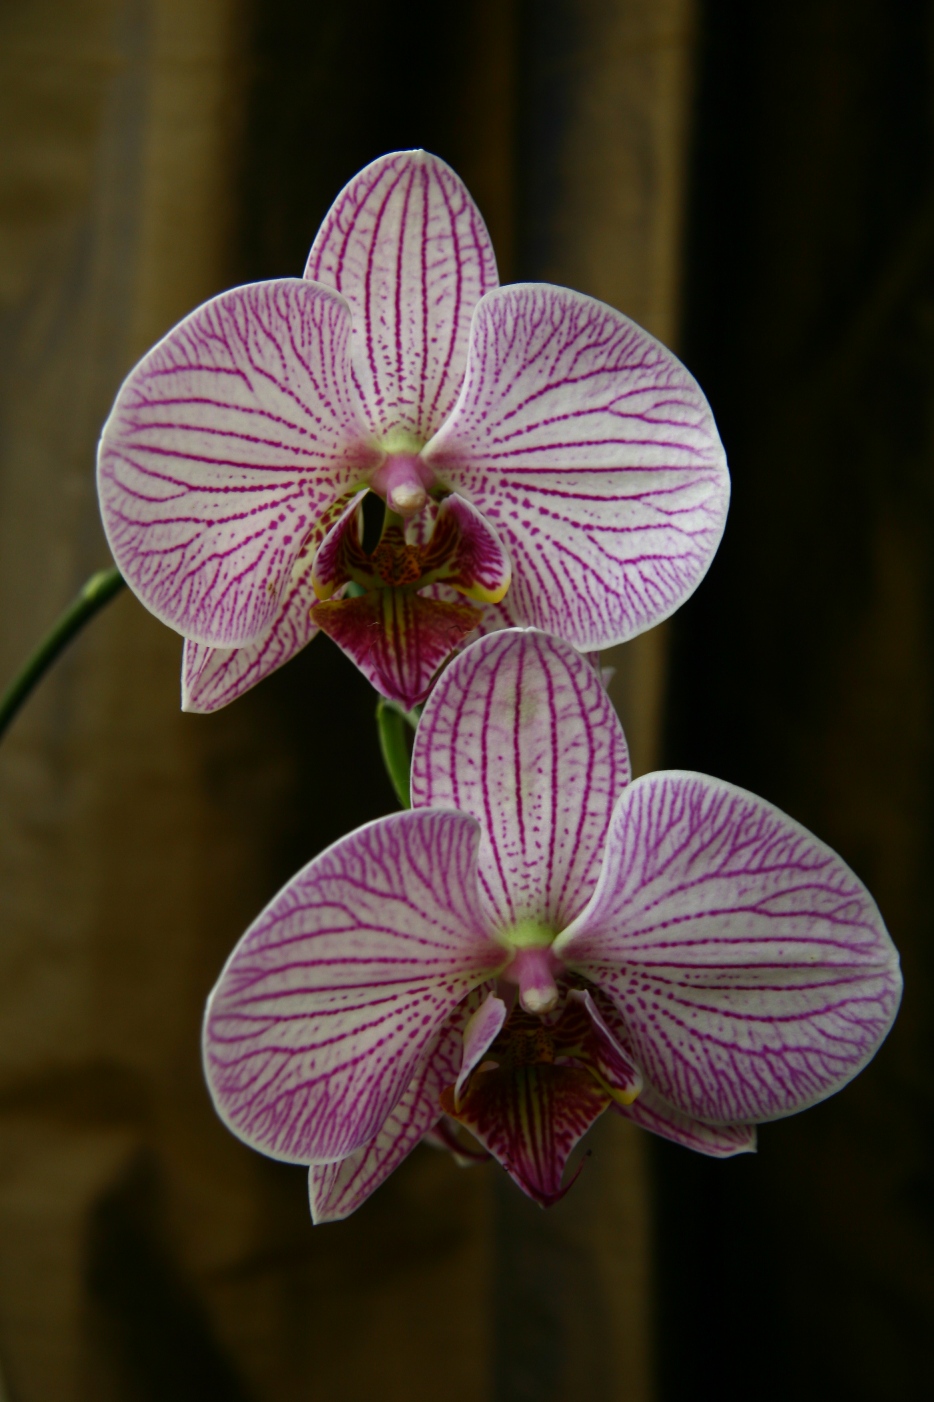 Common Orchid Types